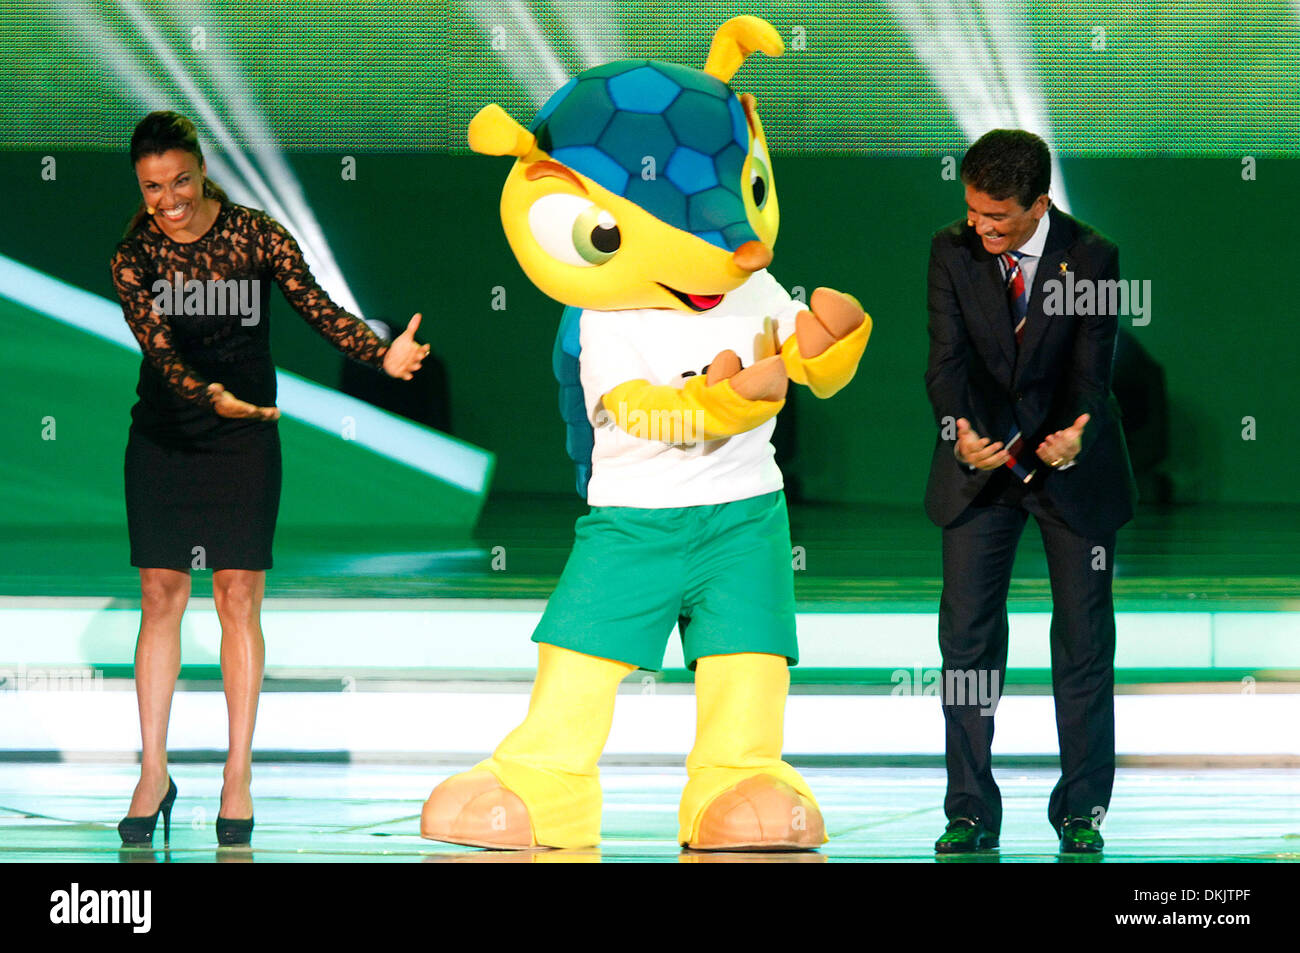 Costa Do Sauipe, Brazil. 6th Dec, 2013. Former Brazilian soccer player Jose Roberto Gama de Oliveira, also known as Bebeto (R), Brazilian soccer player Marta Vieira (L) and the mascot Fuleco (C) perform during the ceremony of the final draw for the groups and matchups of the 2014 FIFA World Cup Brazil in Costa do Sauipe, Brazil, on Dec. 6, 2013. Credit:  Xinhua/Alamy Live News Stock Photo